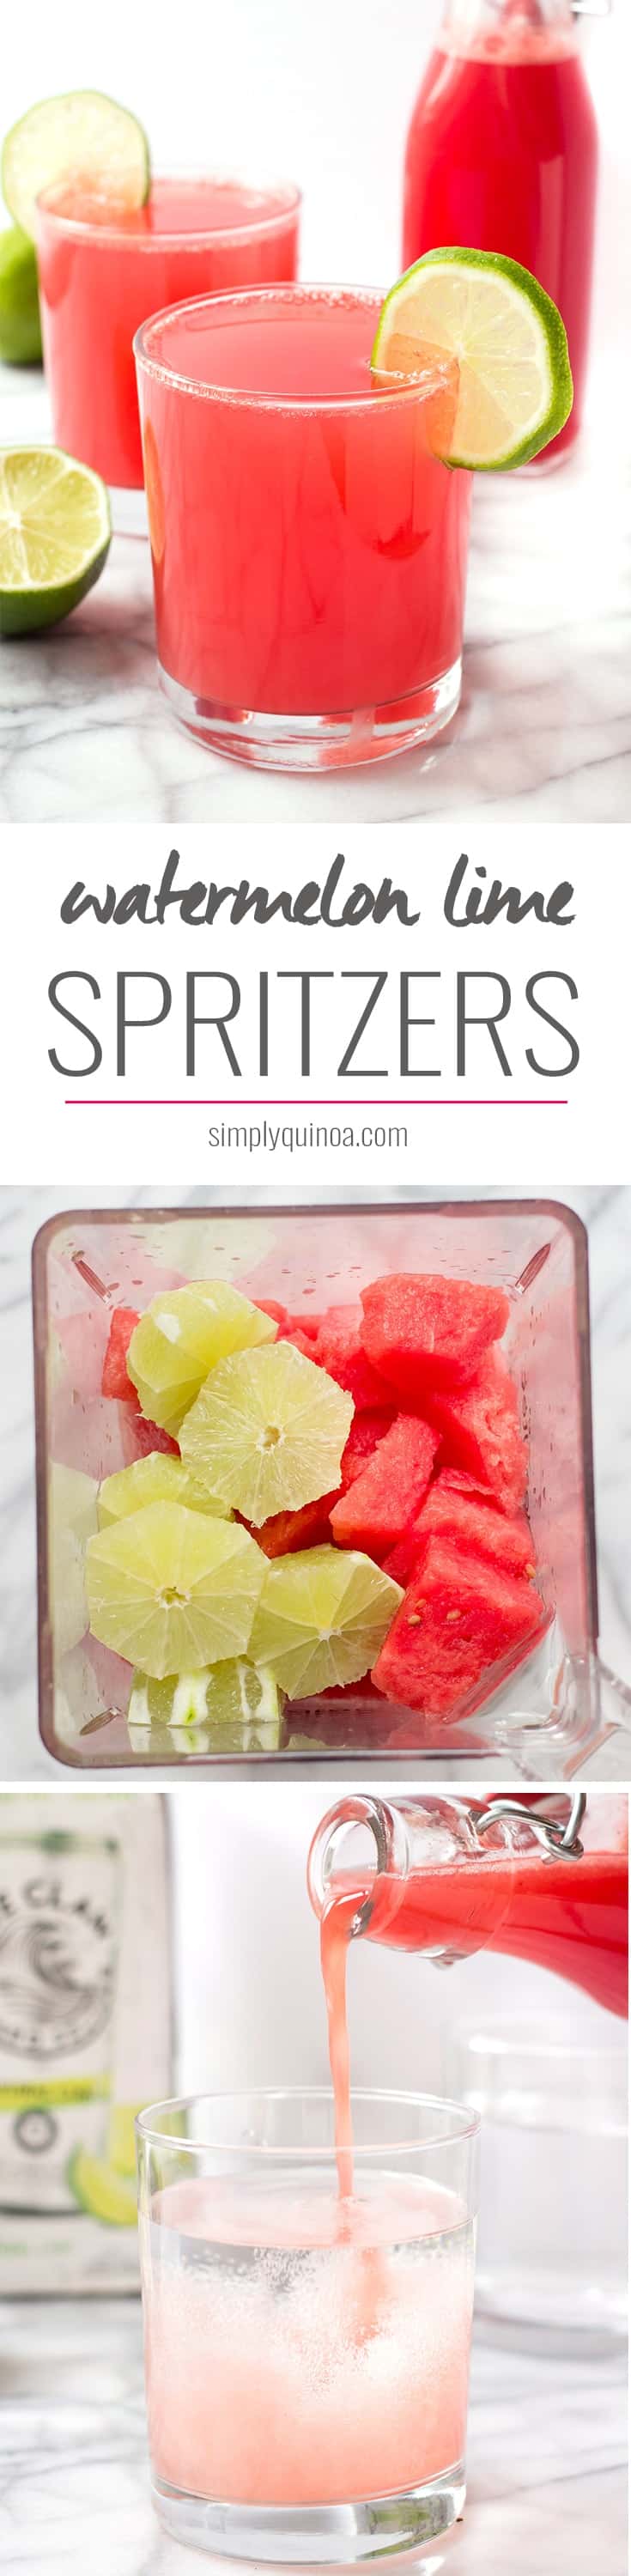 Looking for a healthy summer cocktail recipe? Try these Watermelon Lime Spritzers! They're only three ingredients, sweetened naturally, and are light, crisp and refreshing!